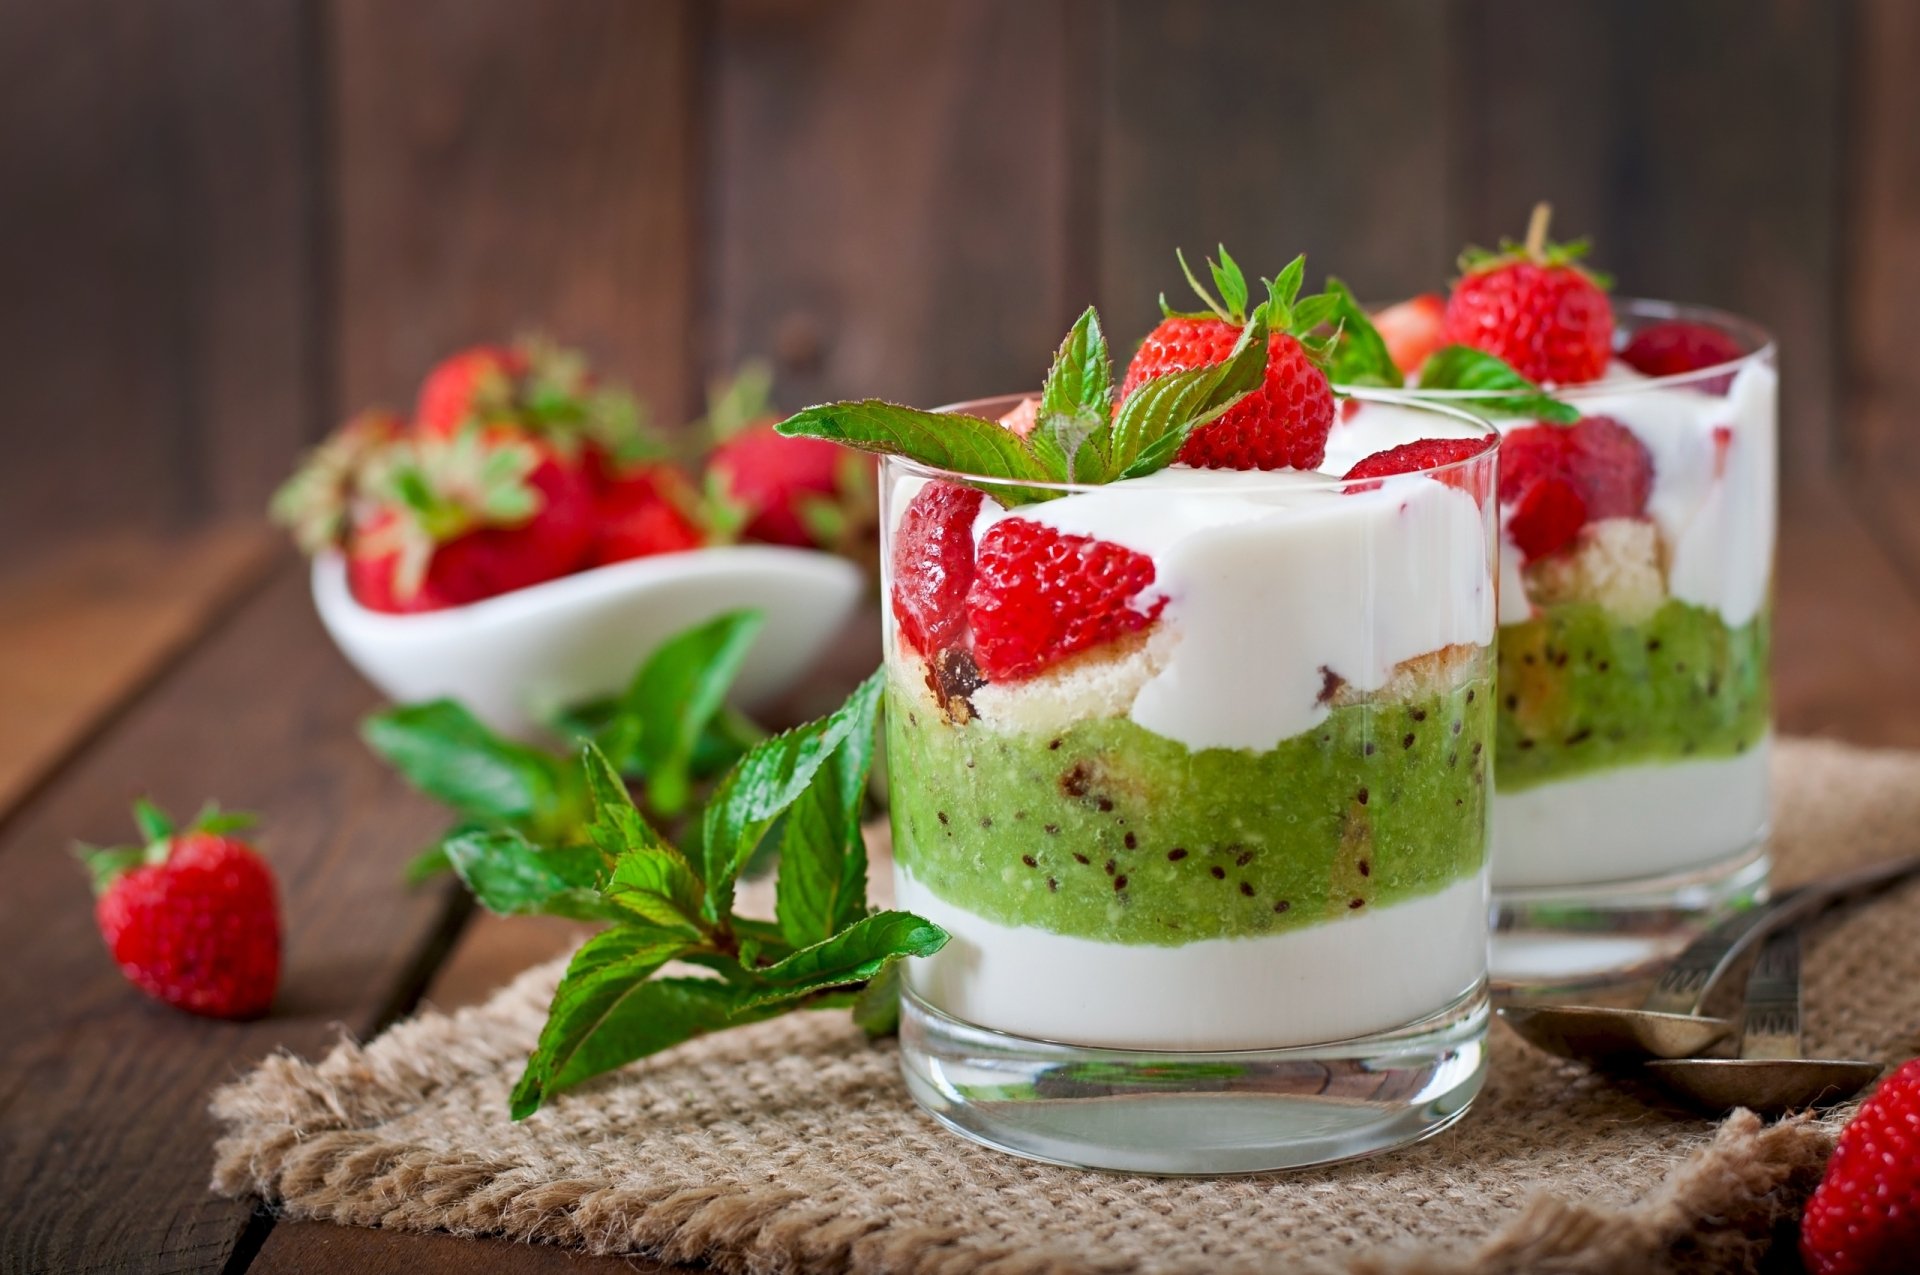 HD desktop wallpaper featuring two glasses of layered dessert with green sponge cake, white cream, and fresh strawberries topped with mint leaves.